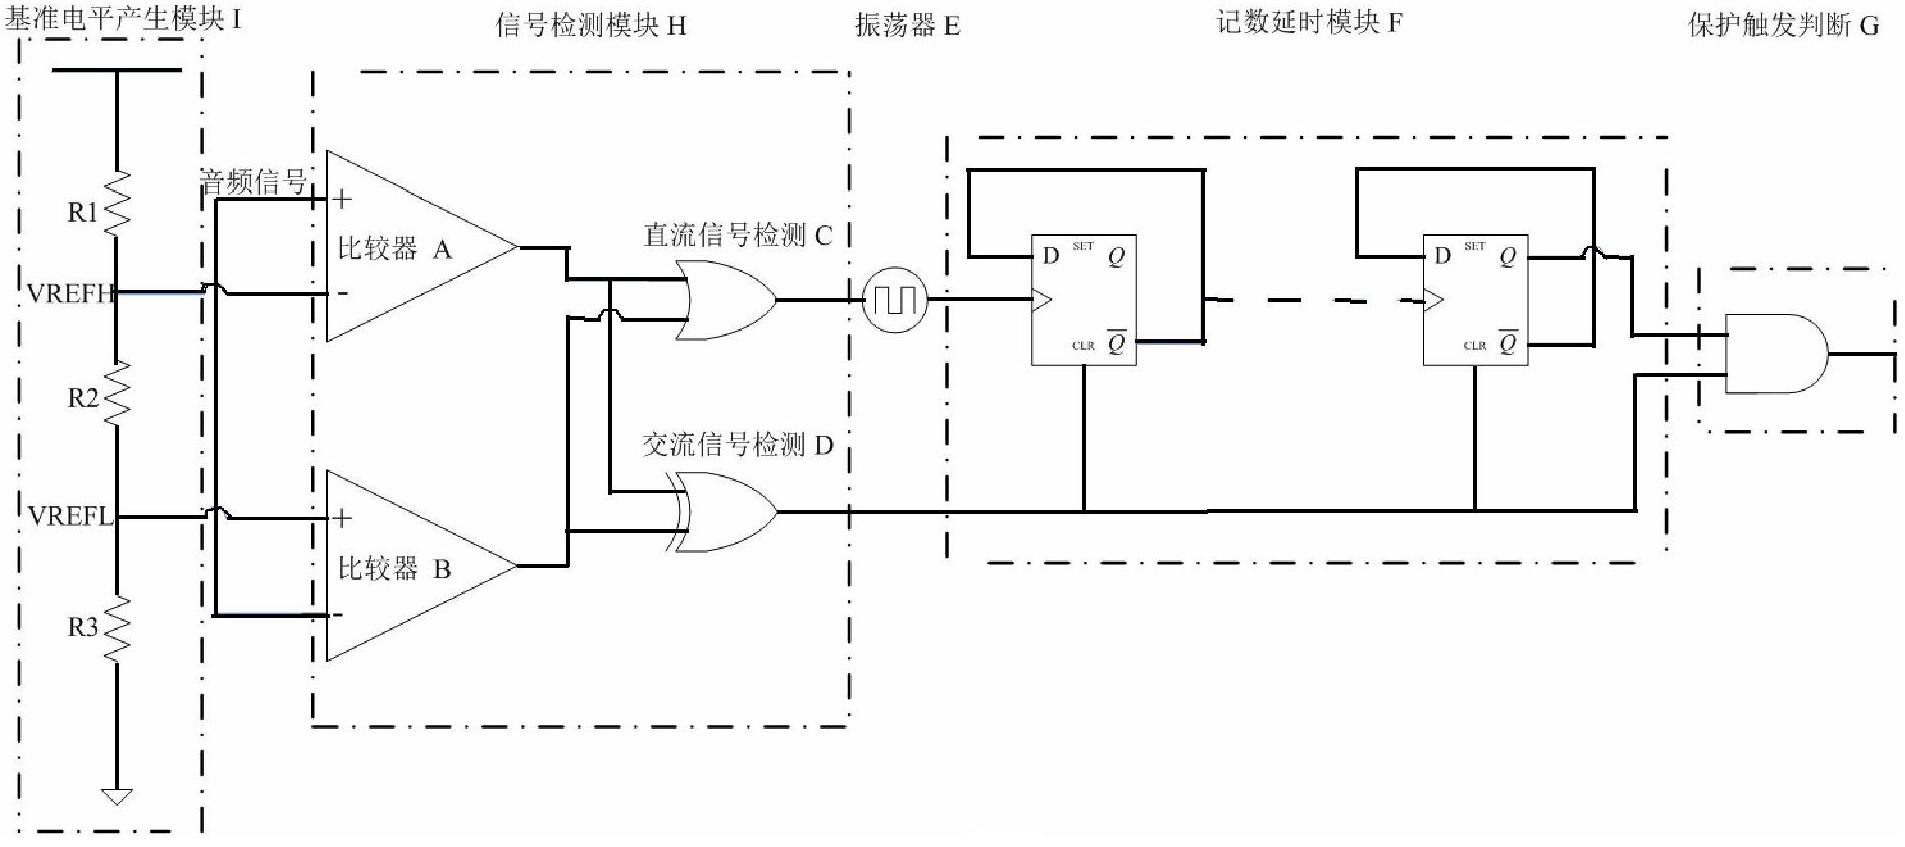 Loudspeaker protection circuit capable of preventing direct current overload for audio power amplifier